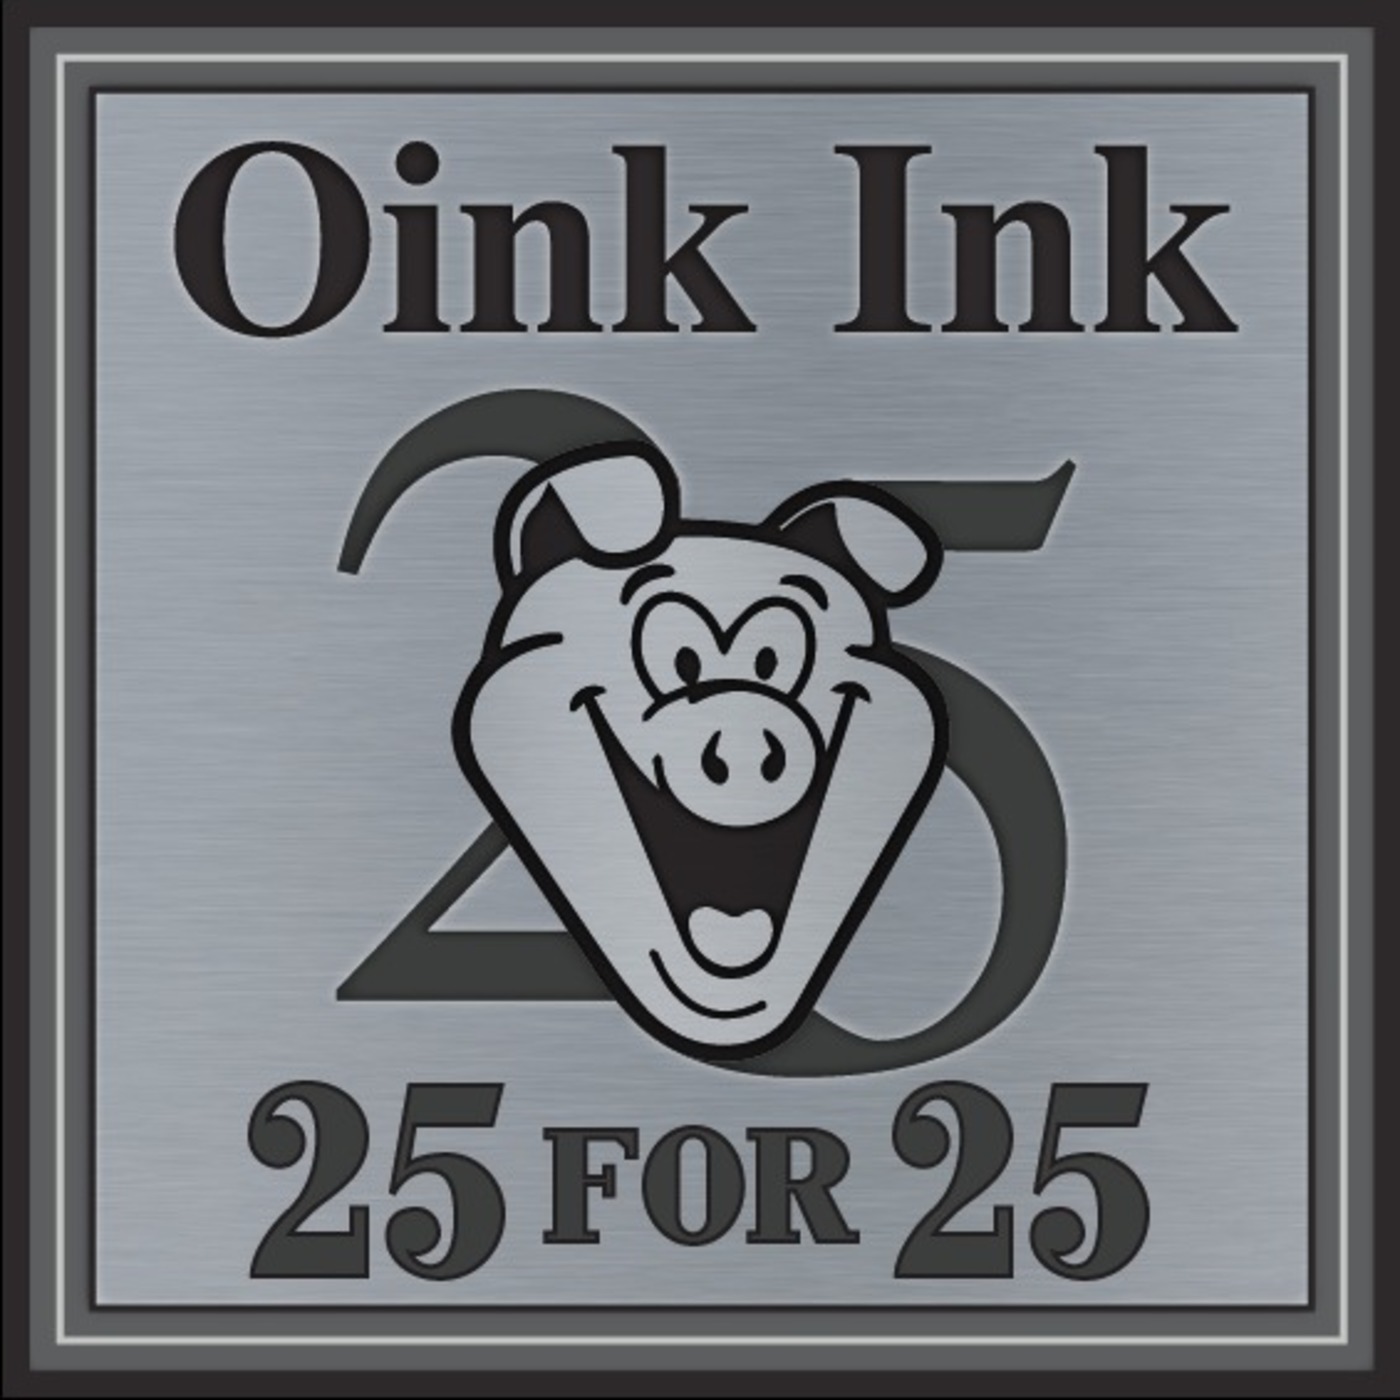 Oink Ink Radio Presents - 25 For 25